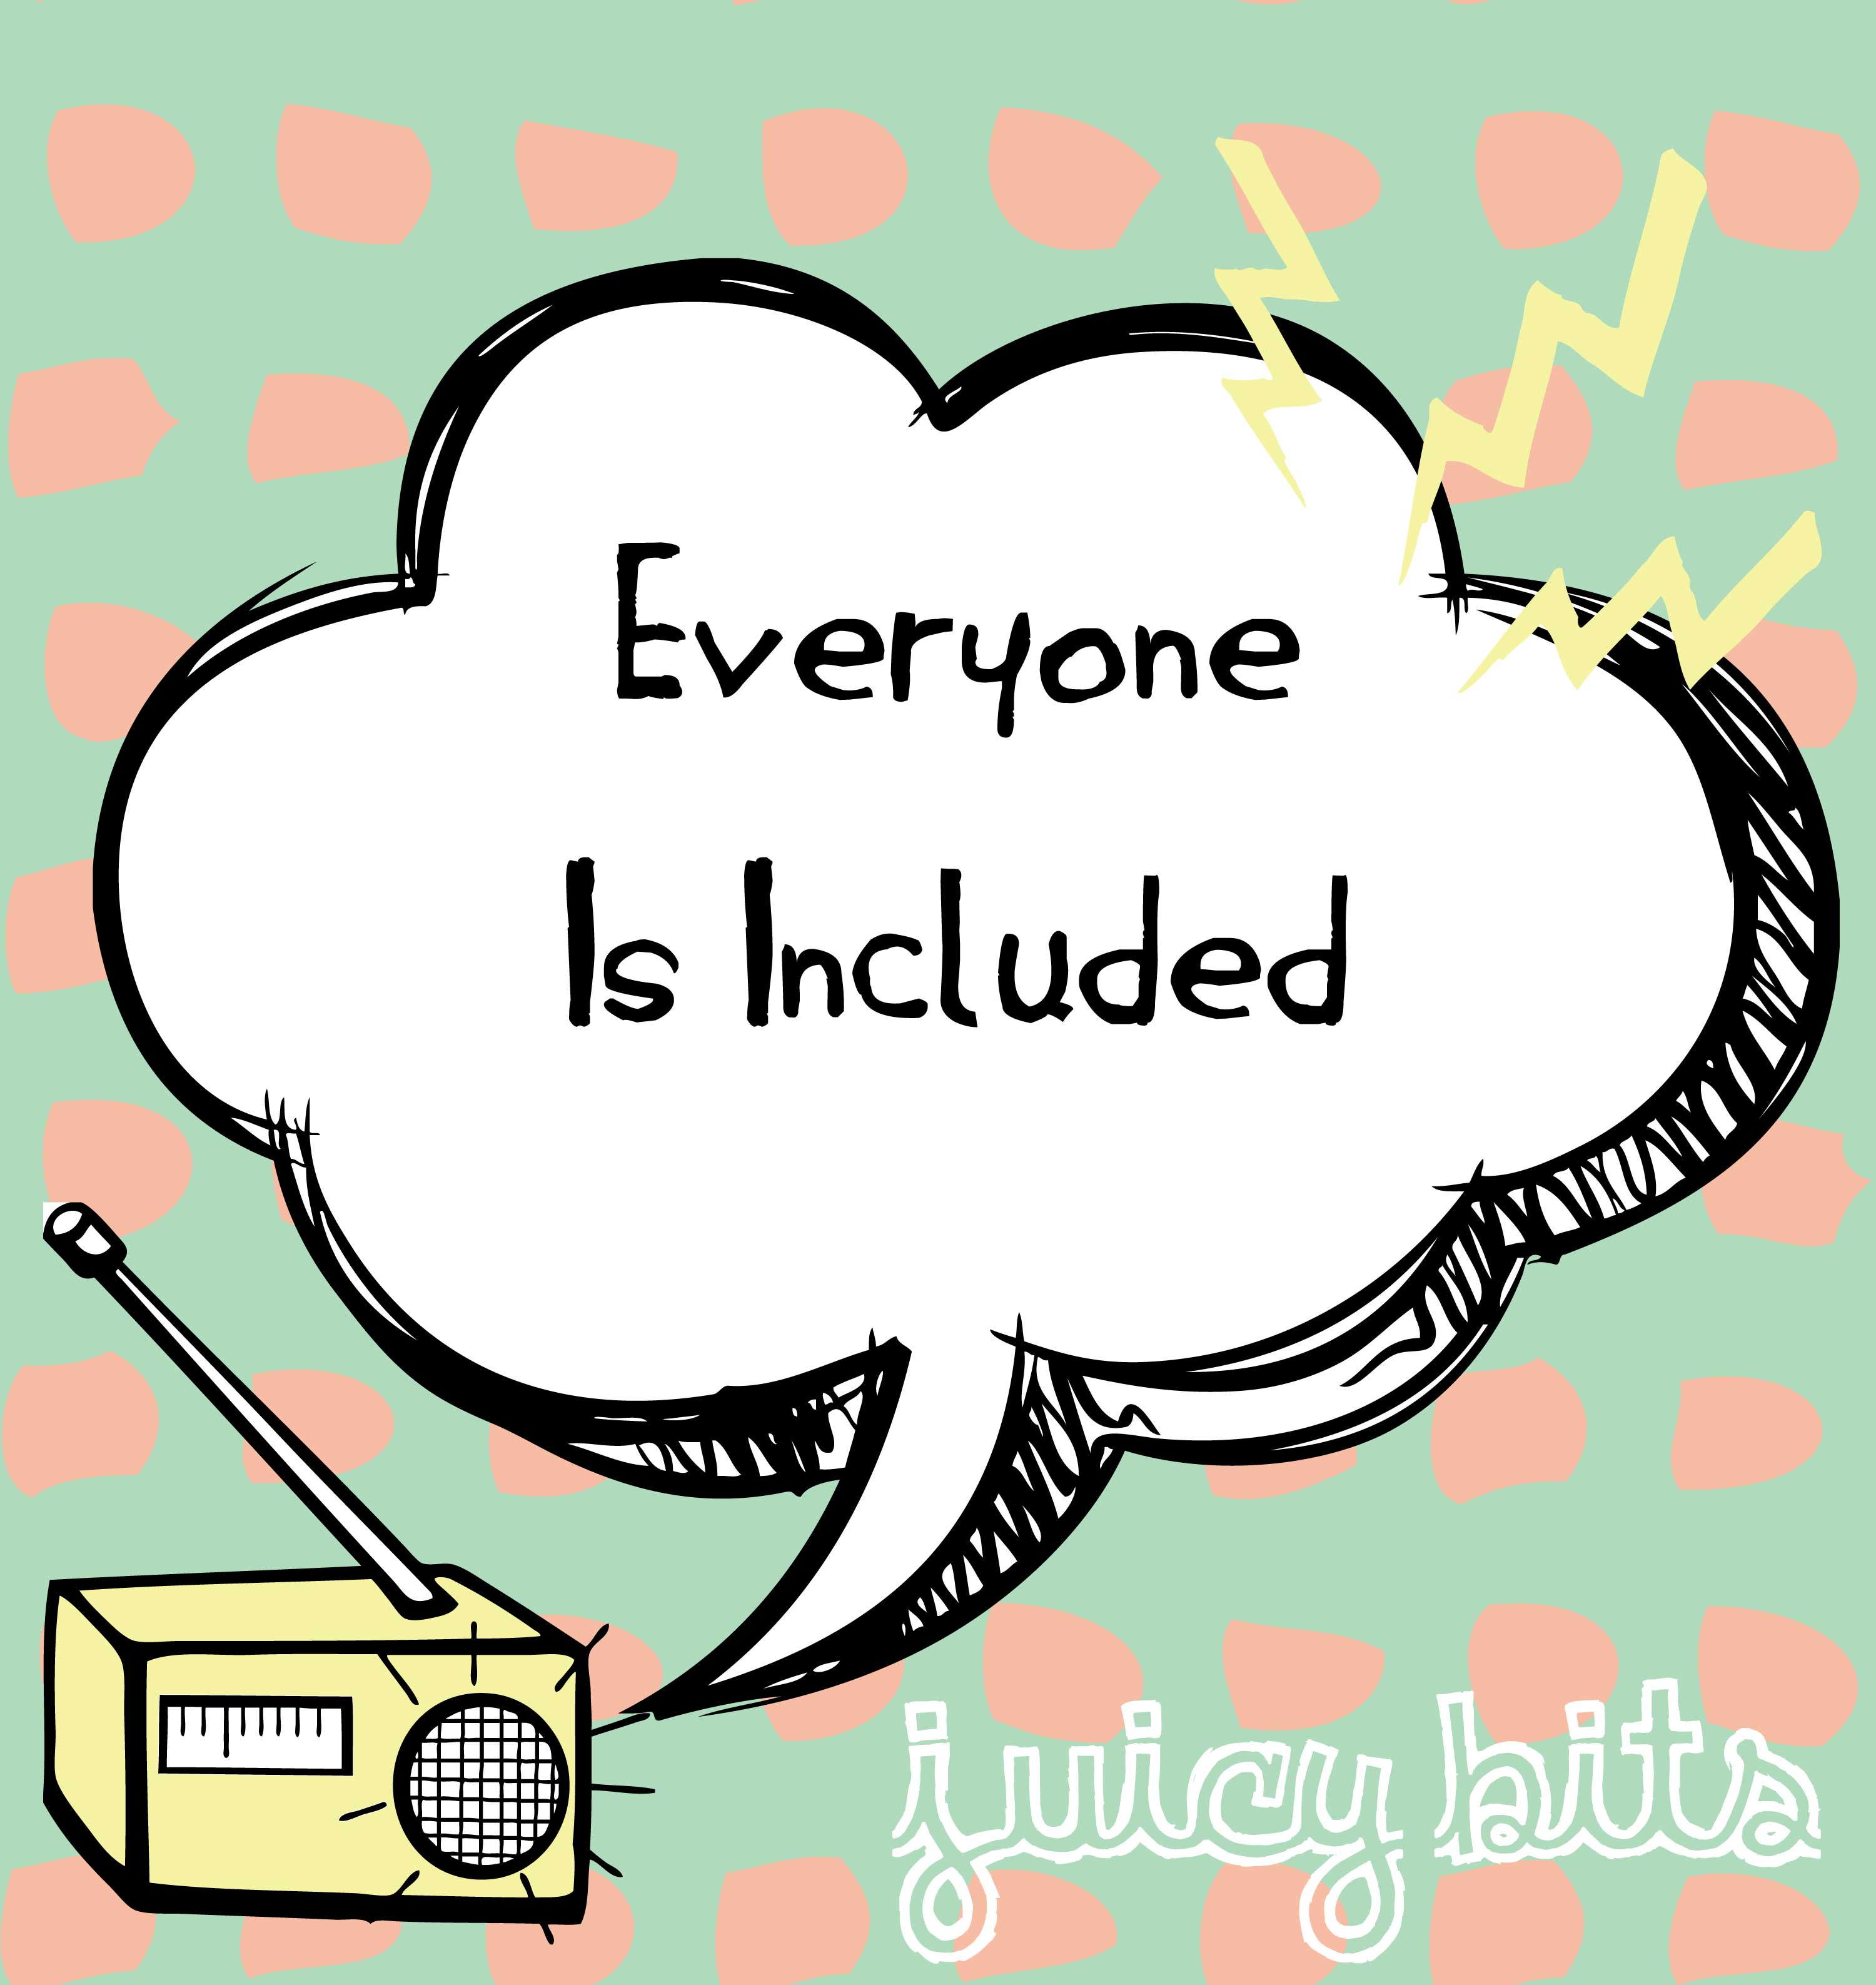 Juicy Bits: Everyone Is Included